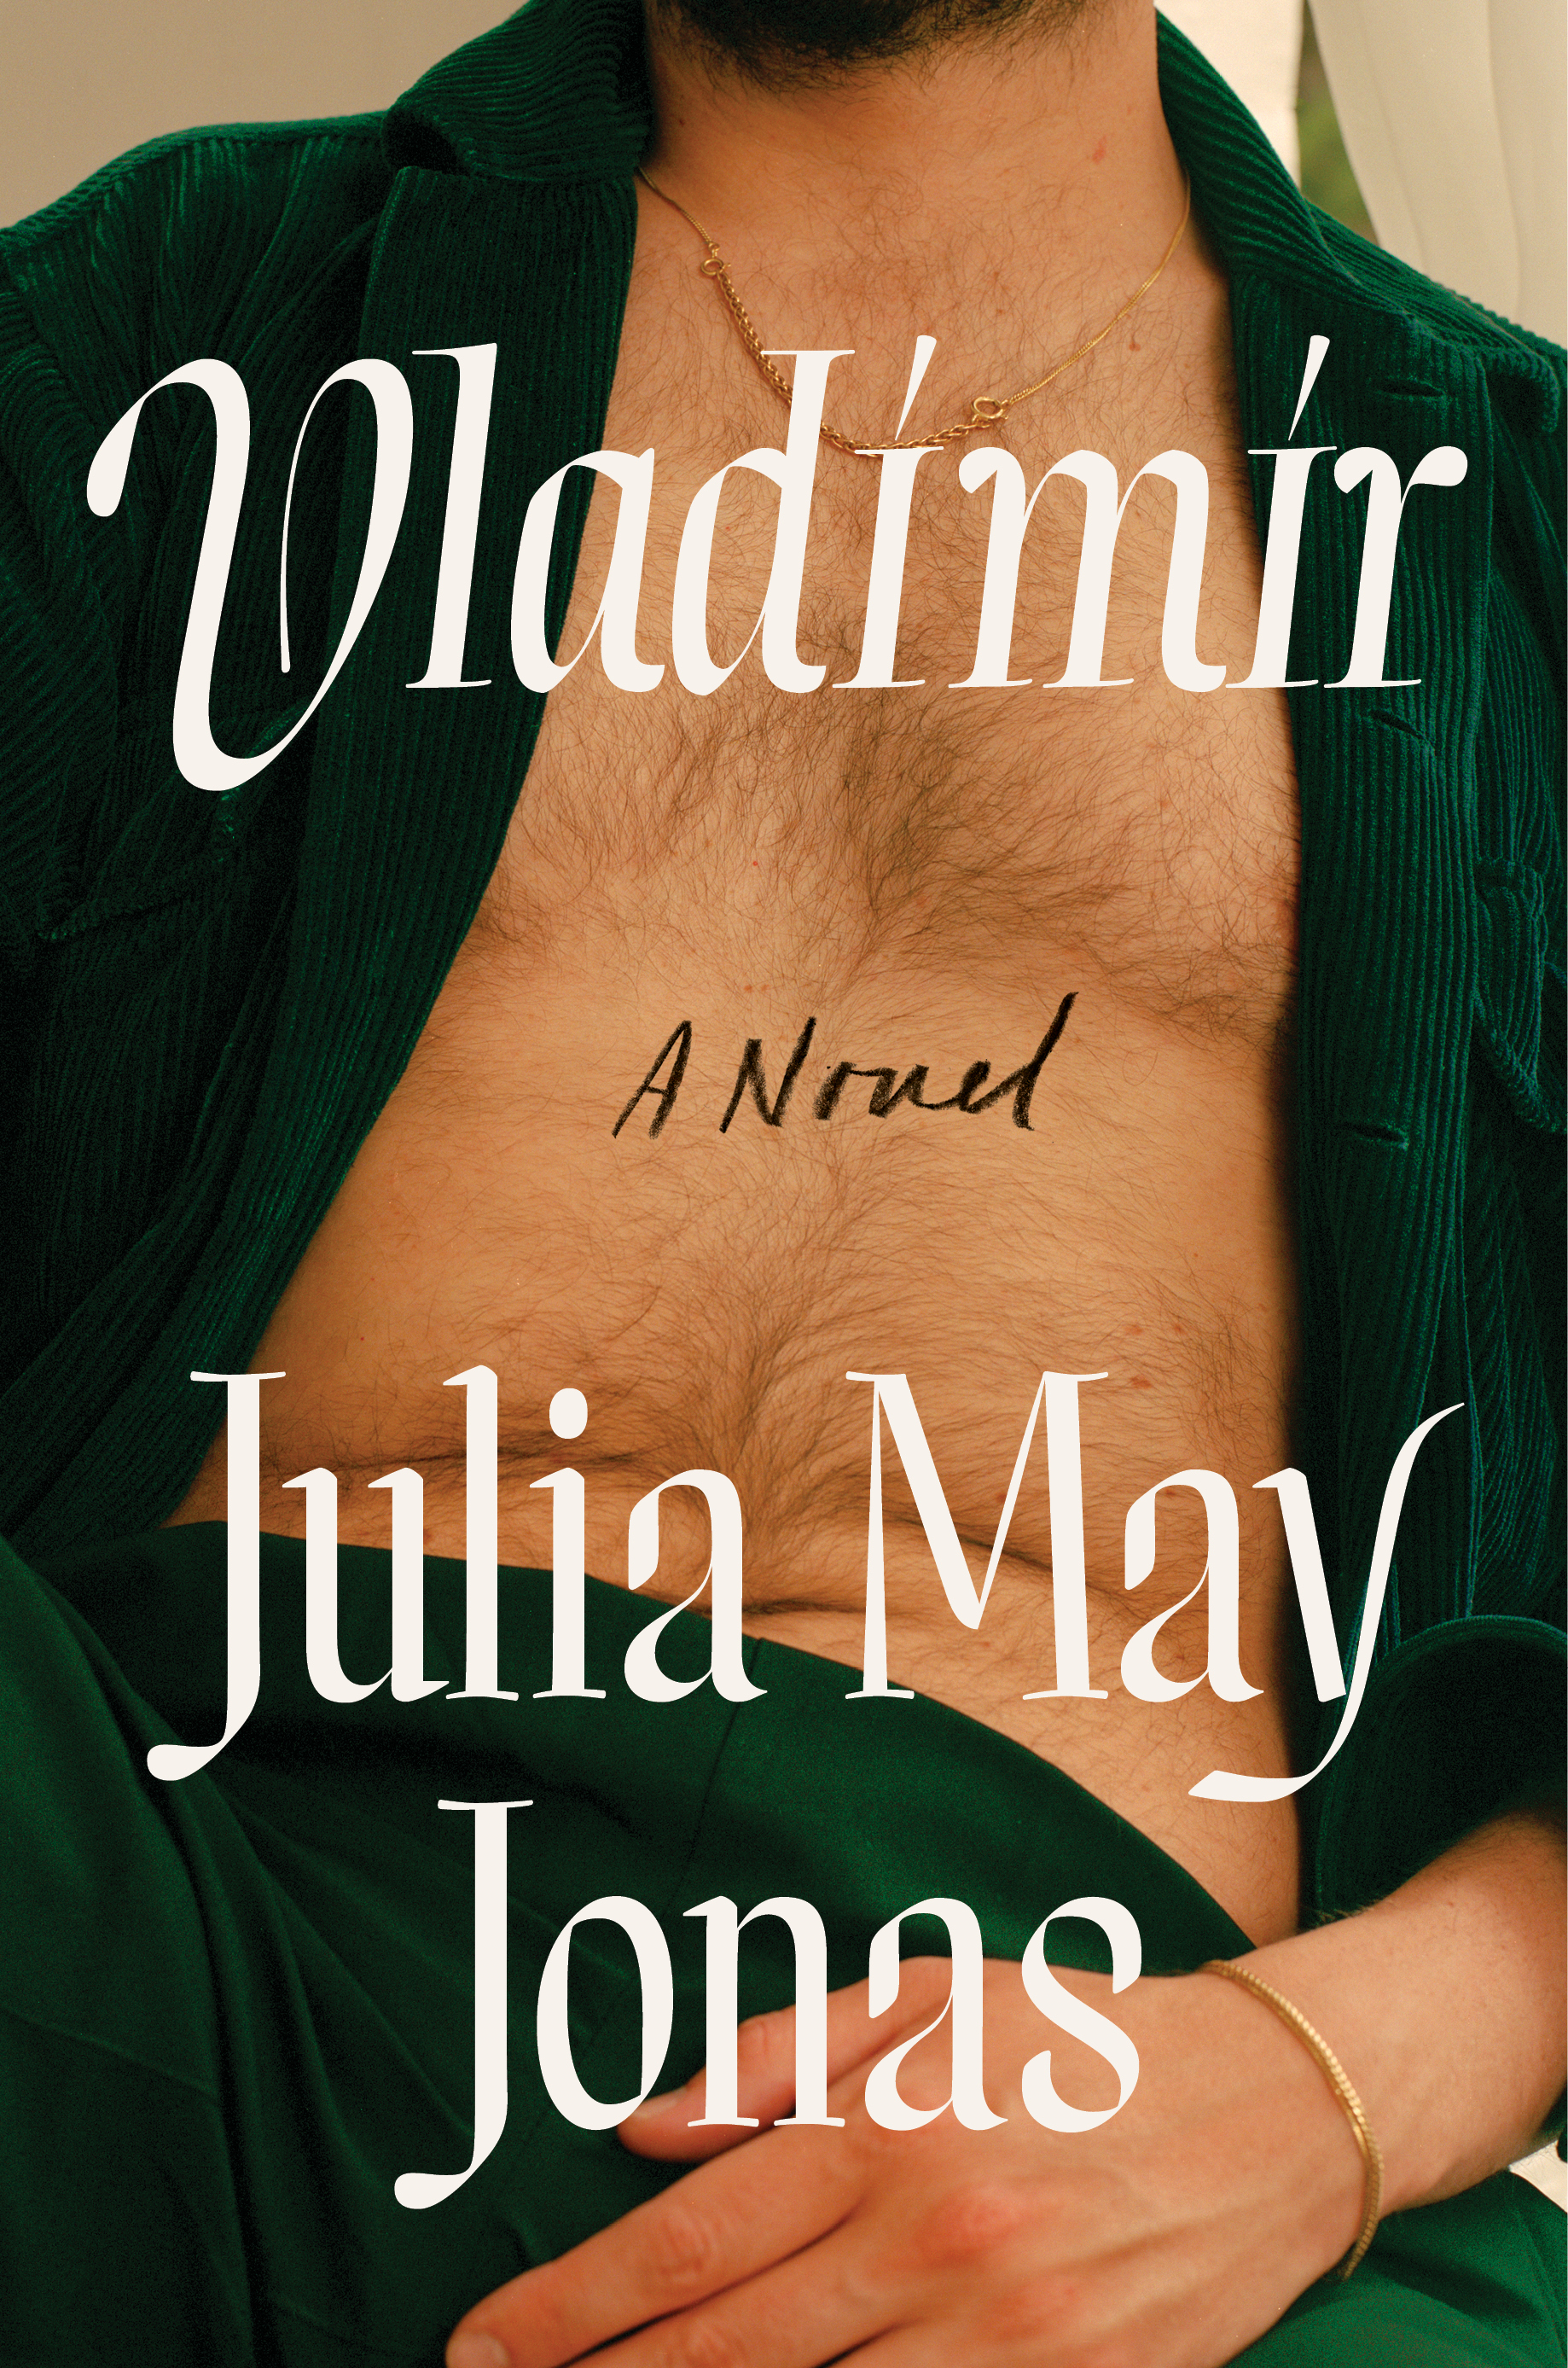 The headless torso of a man wearing an open robe on the cover of the book “Vladimir” by Julia May Jonas.